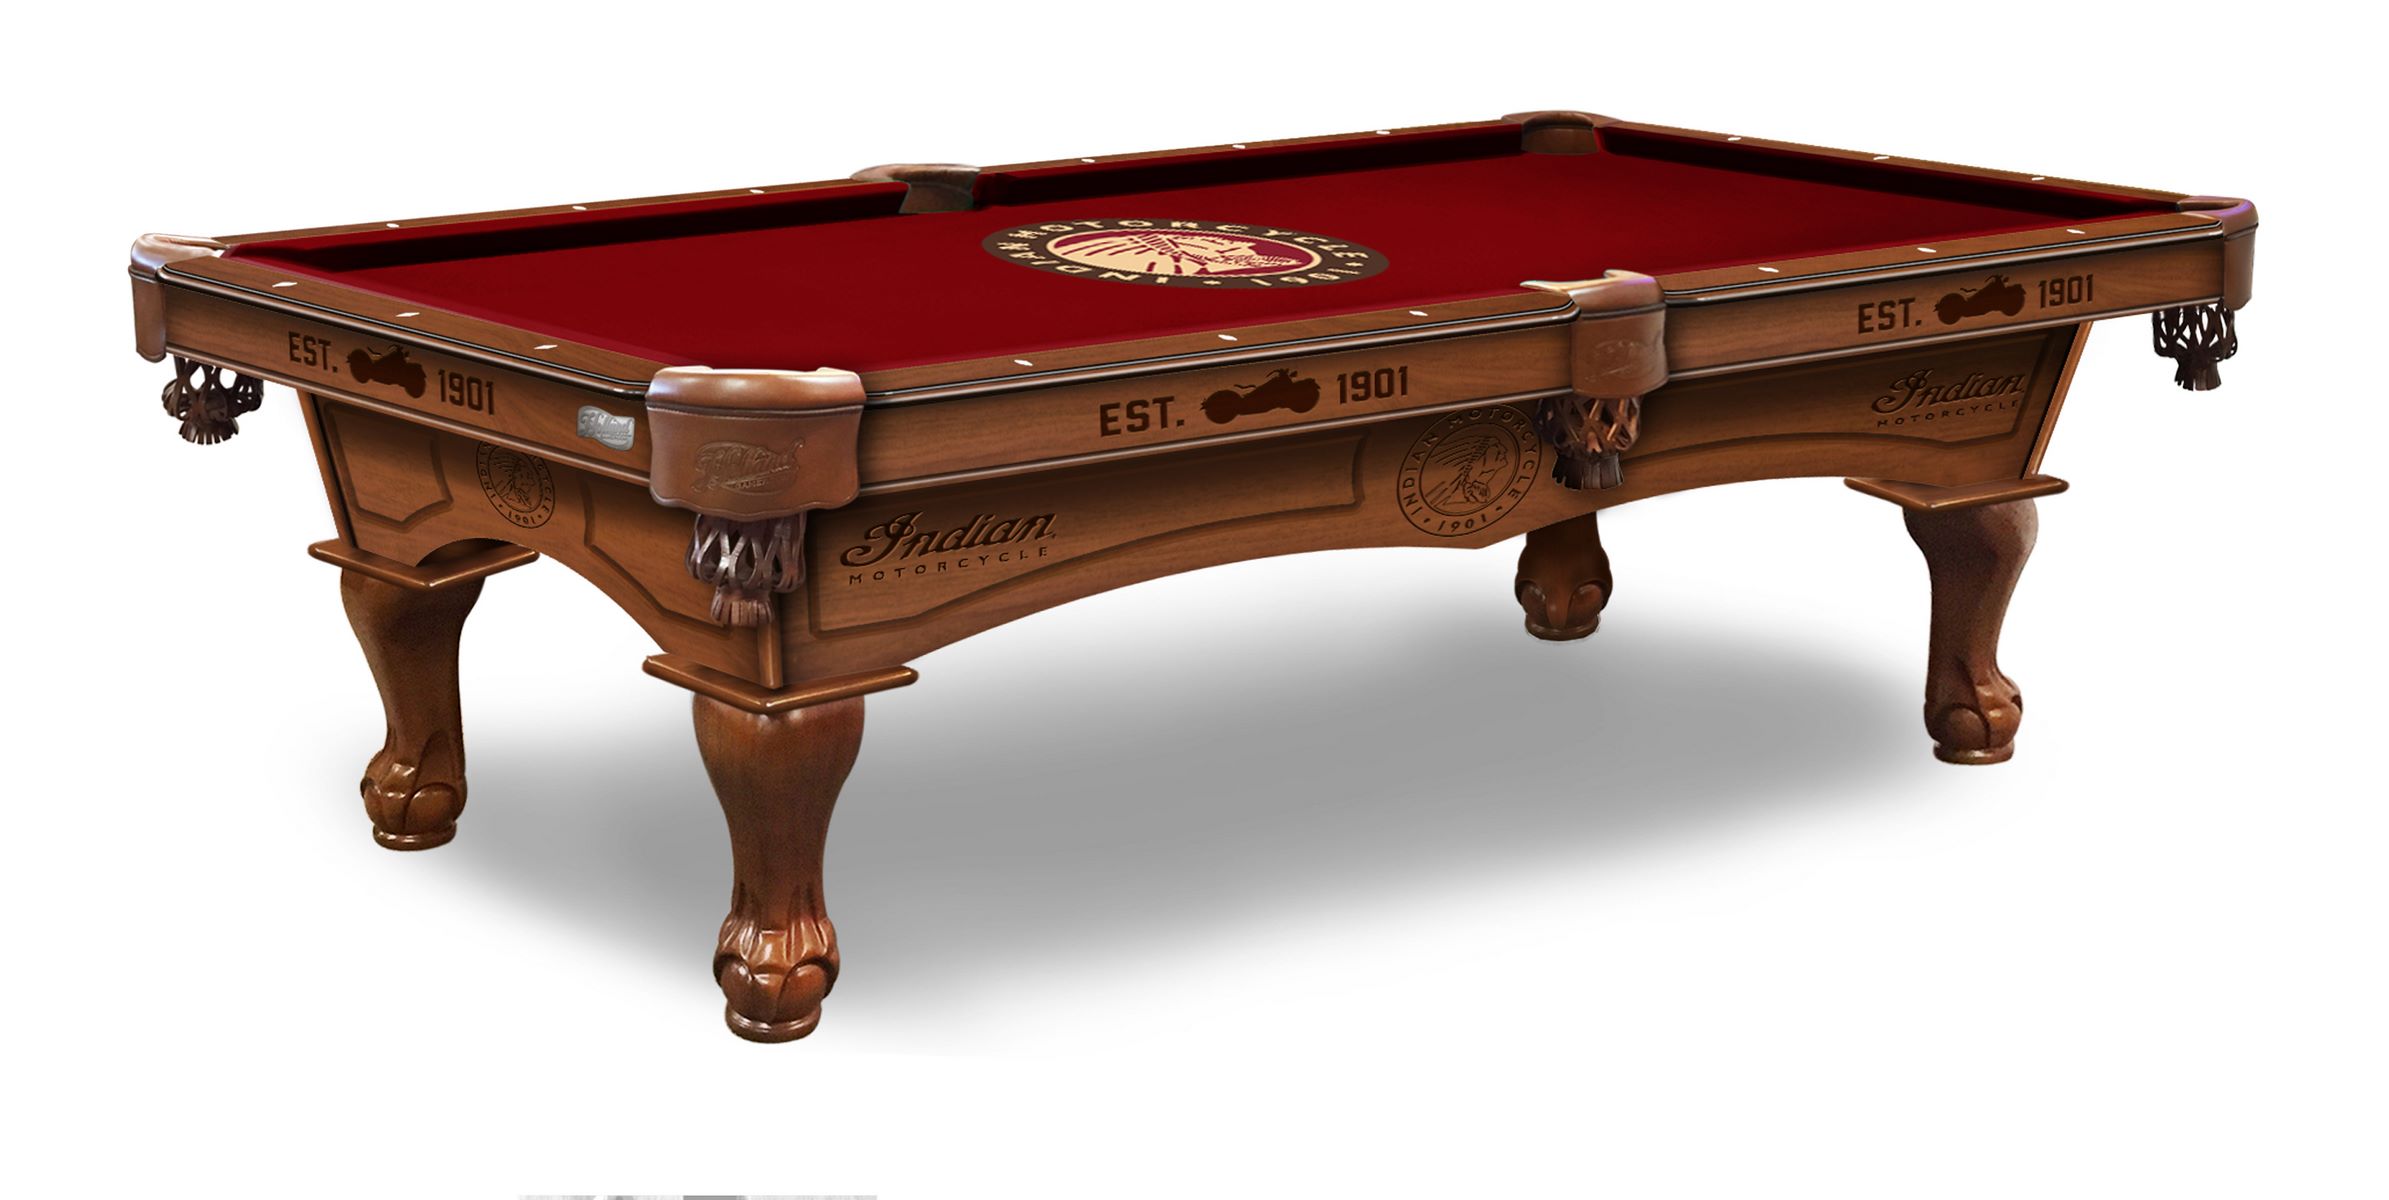 Pt8chrdclawindian-pclindn-hd Indian Motorcycle 8 Ft. Pool Table